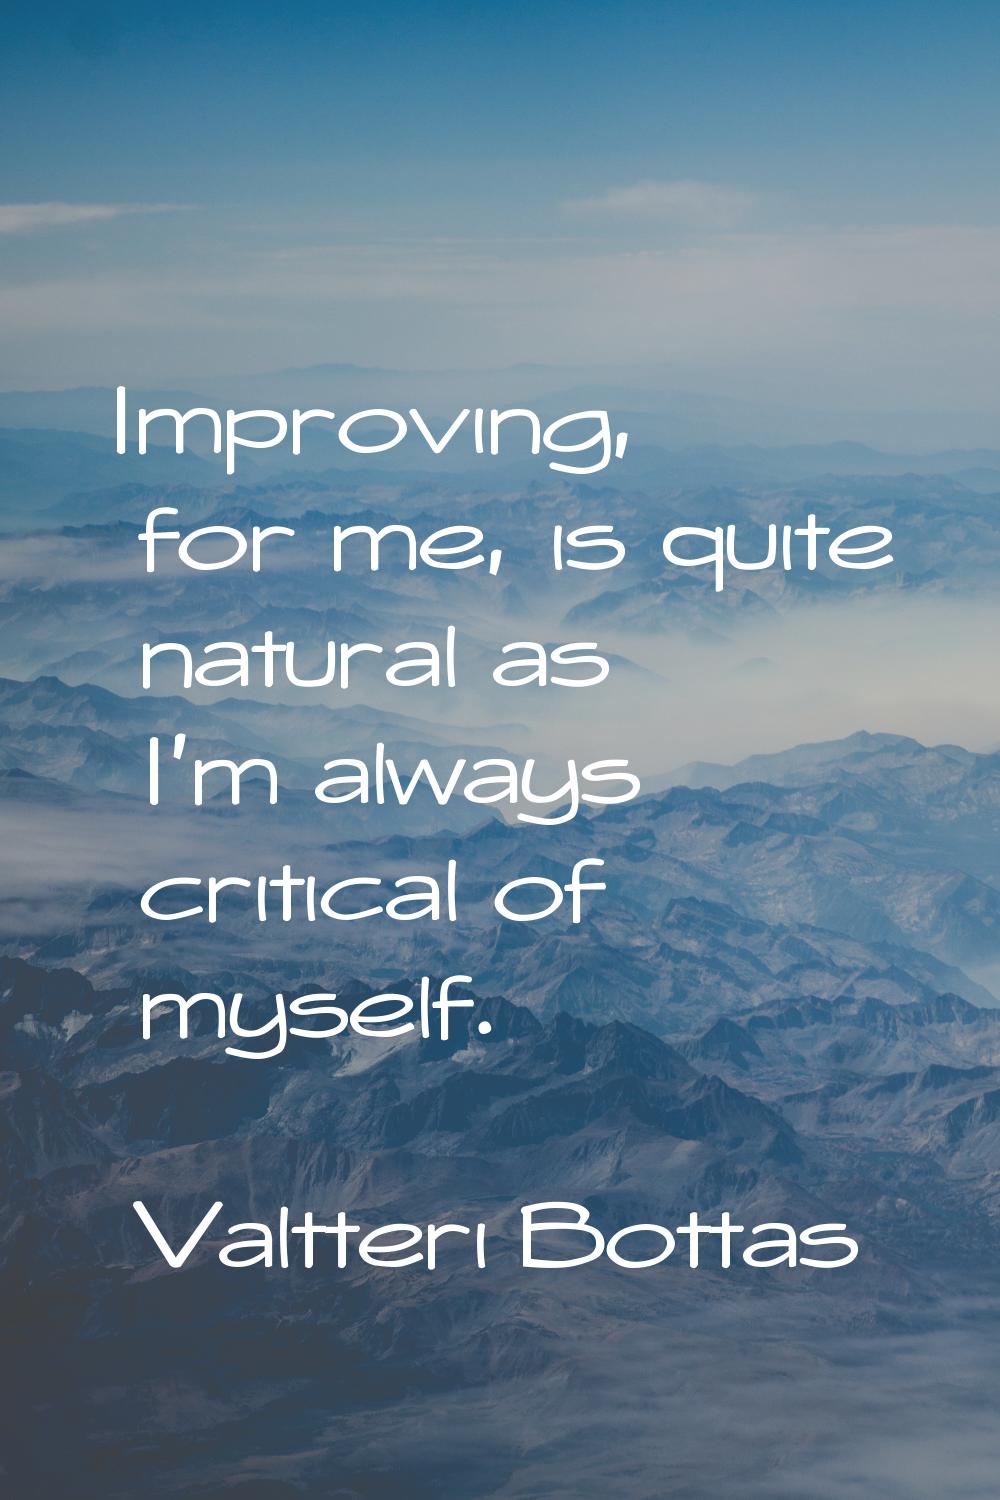 Improving, for me, is quite natural as I'm always critical of myself.